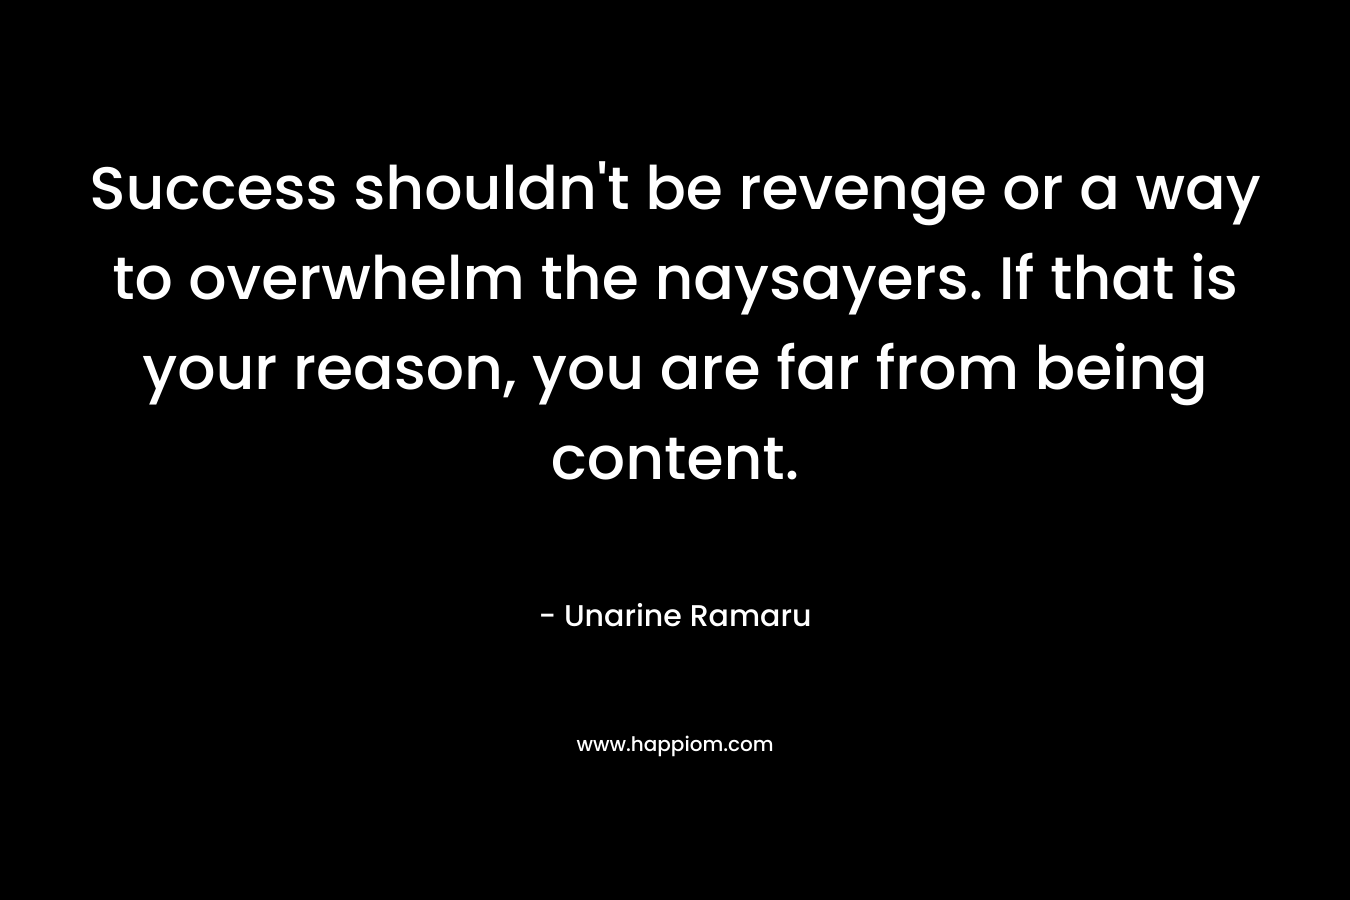 Success shouldn’t be revenge or a way to overwhelm the naysayers. If that is your reason, you are far from being content. – Unarine Ramaru